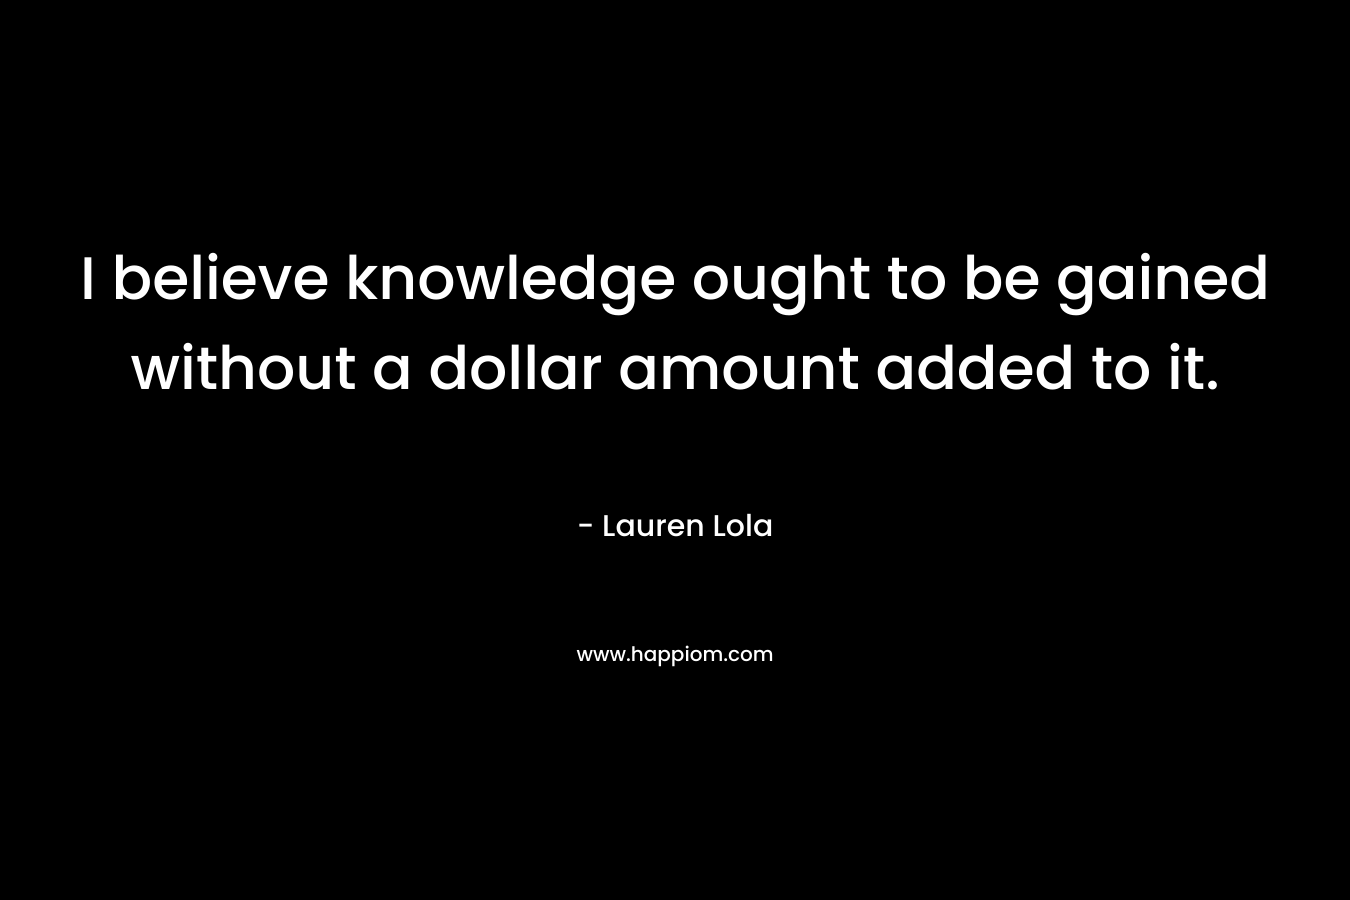 I believe knowledge ought to be gained without a dollar amount added to it. – Lauren Lola